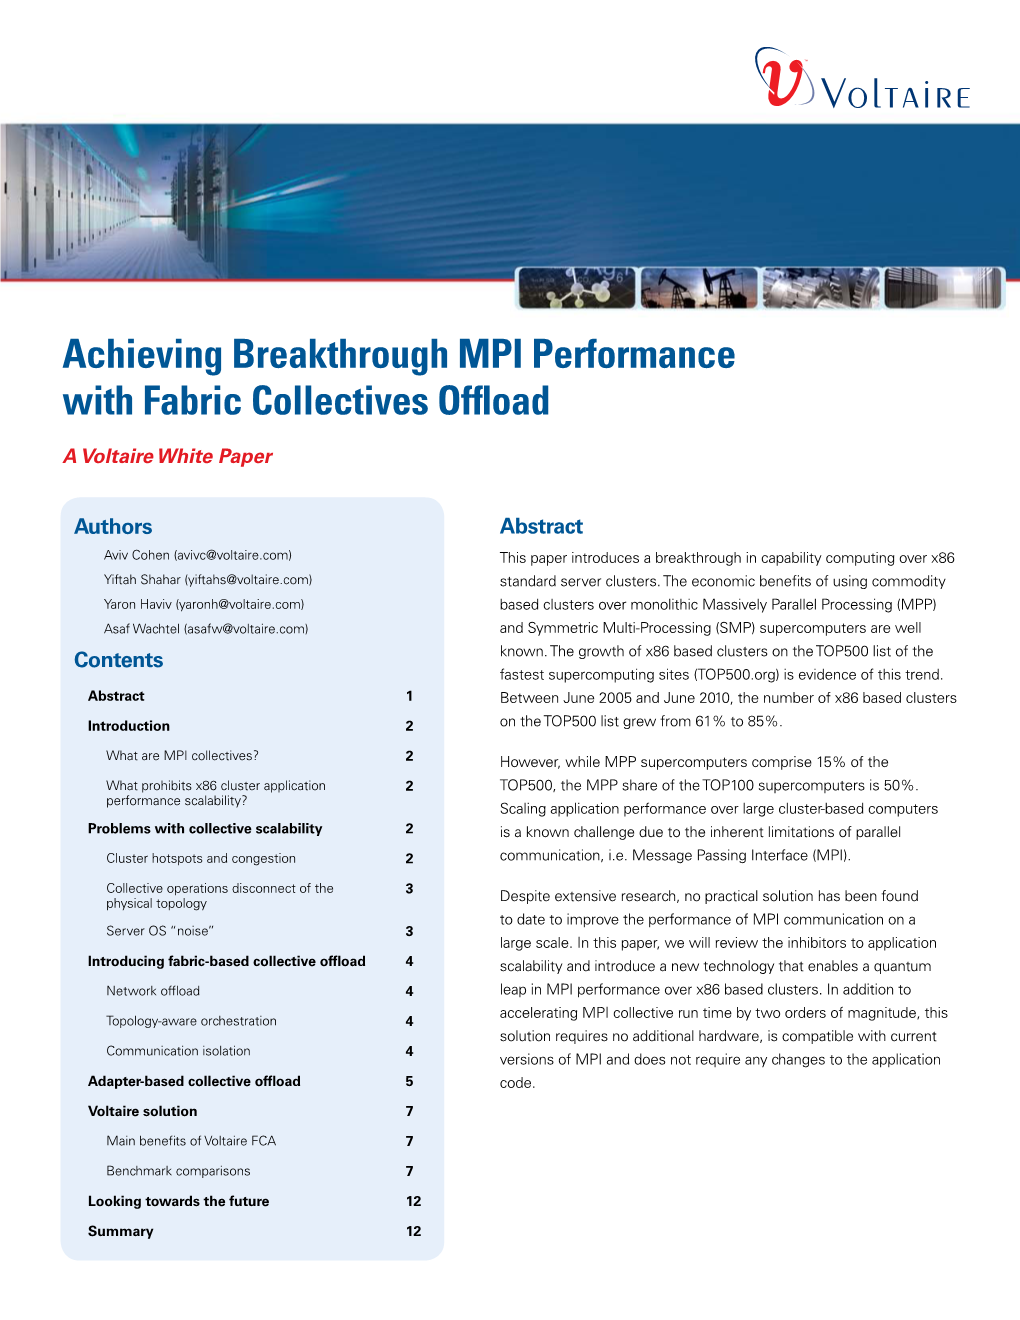 Achieving Breakthrough MPI Performance with Fabric Collectives Offload